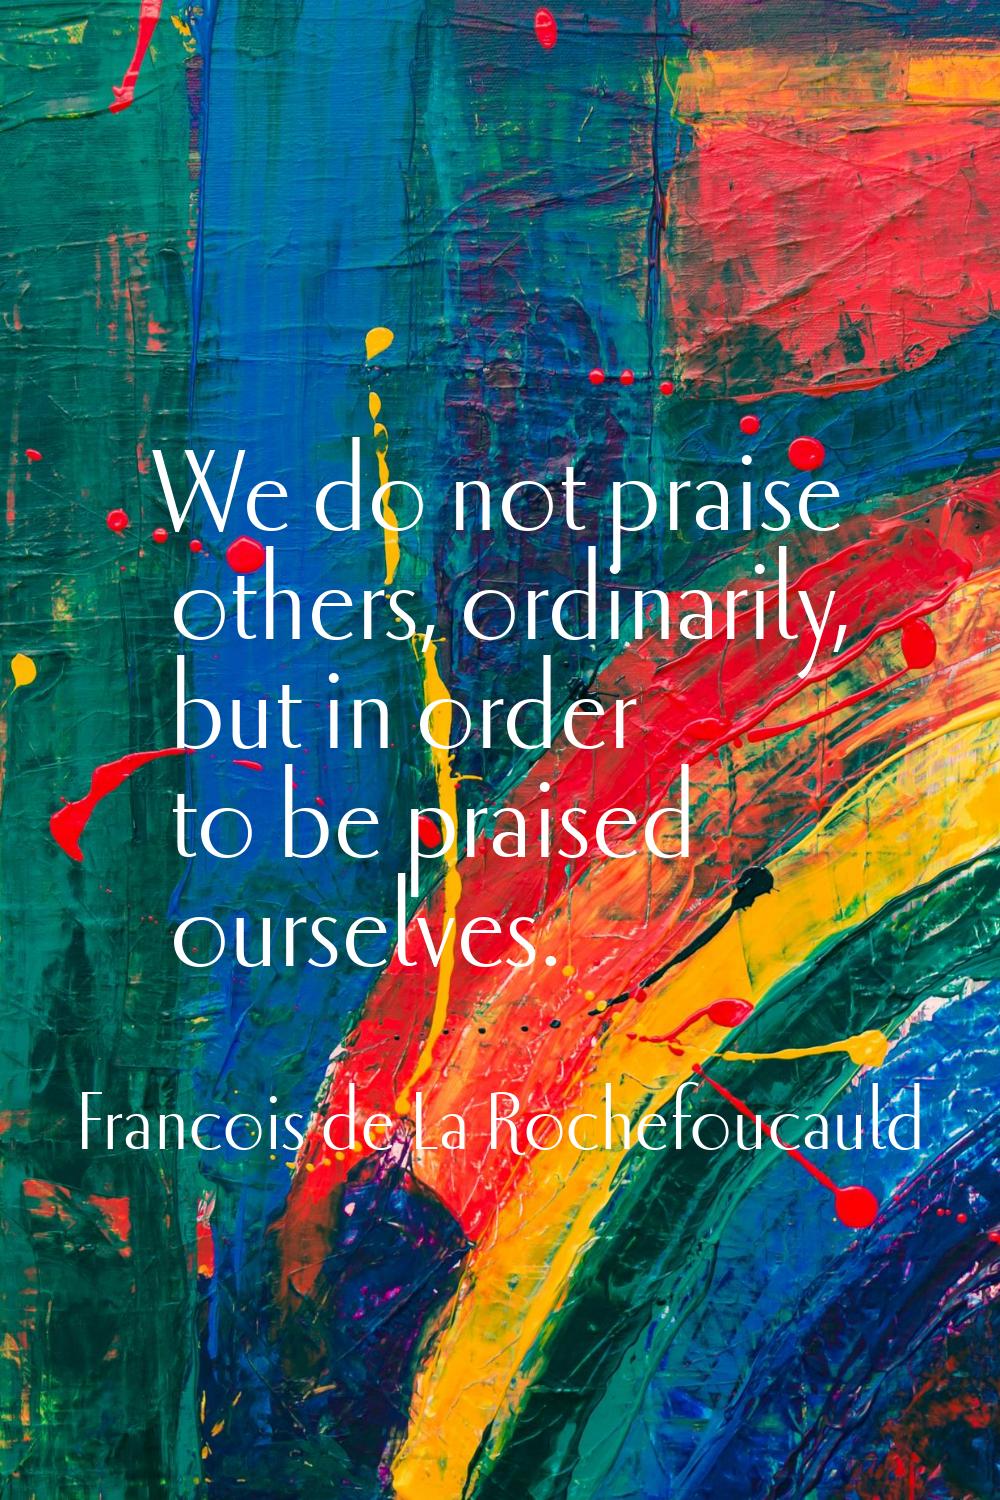 We do not praise others, ordinarily, but in order to be praised ourselves.